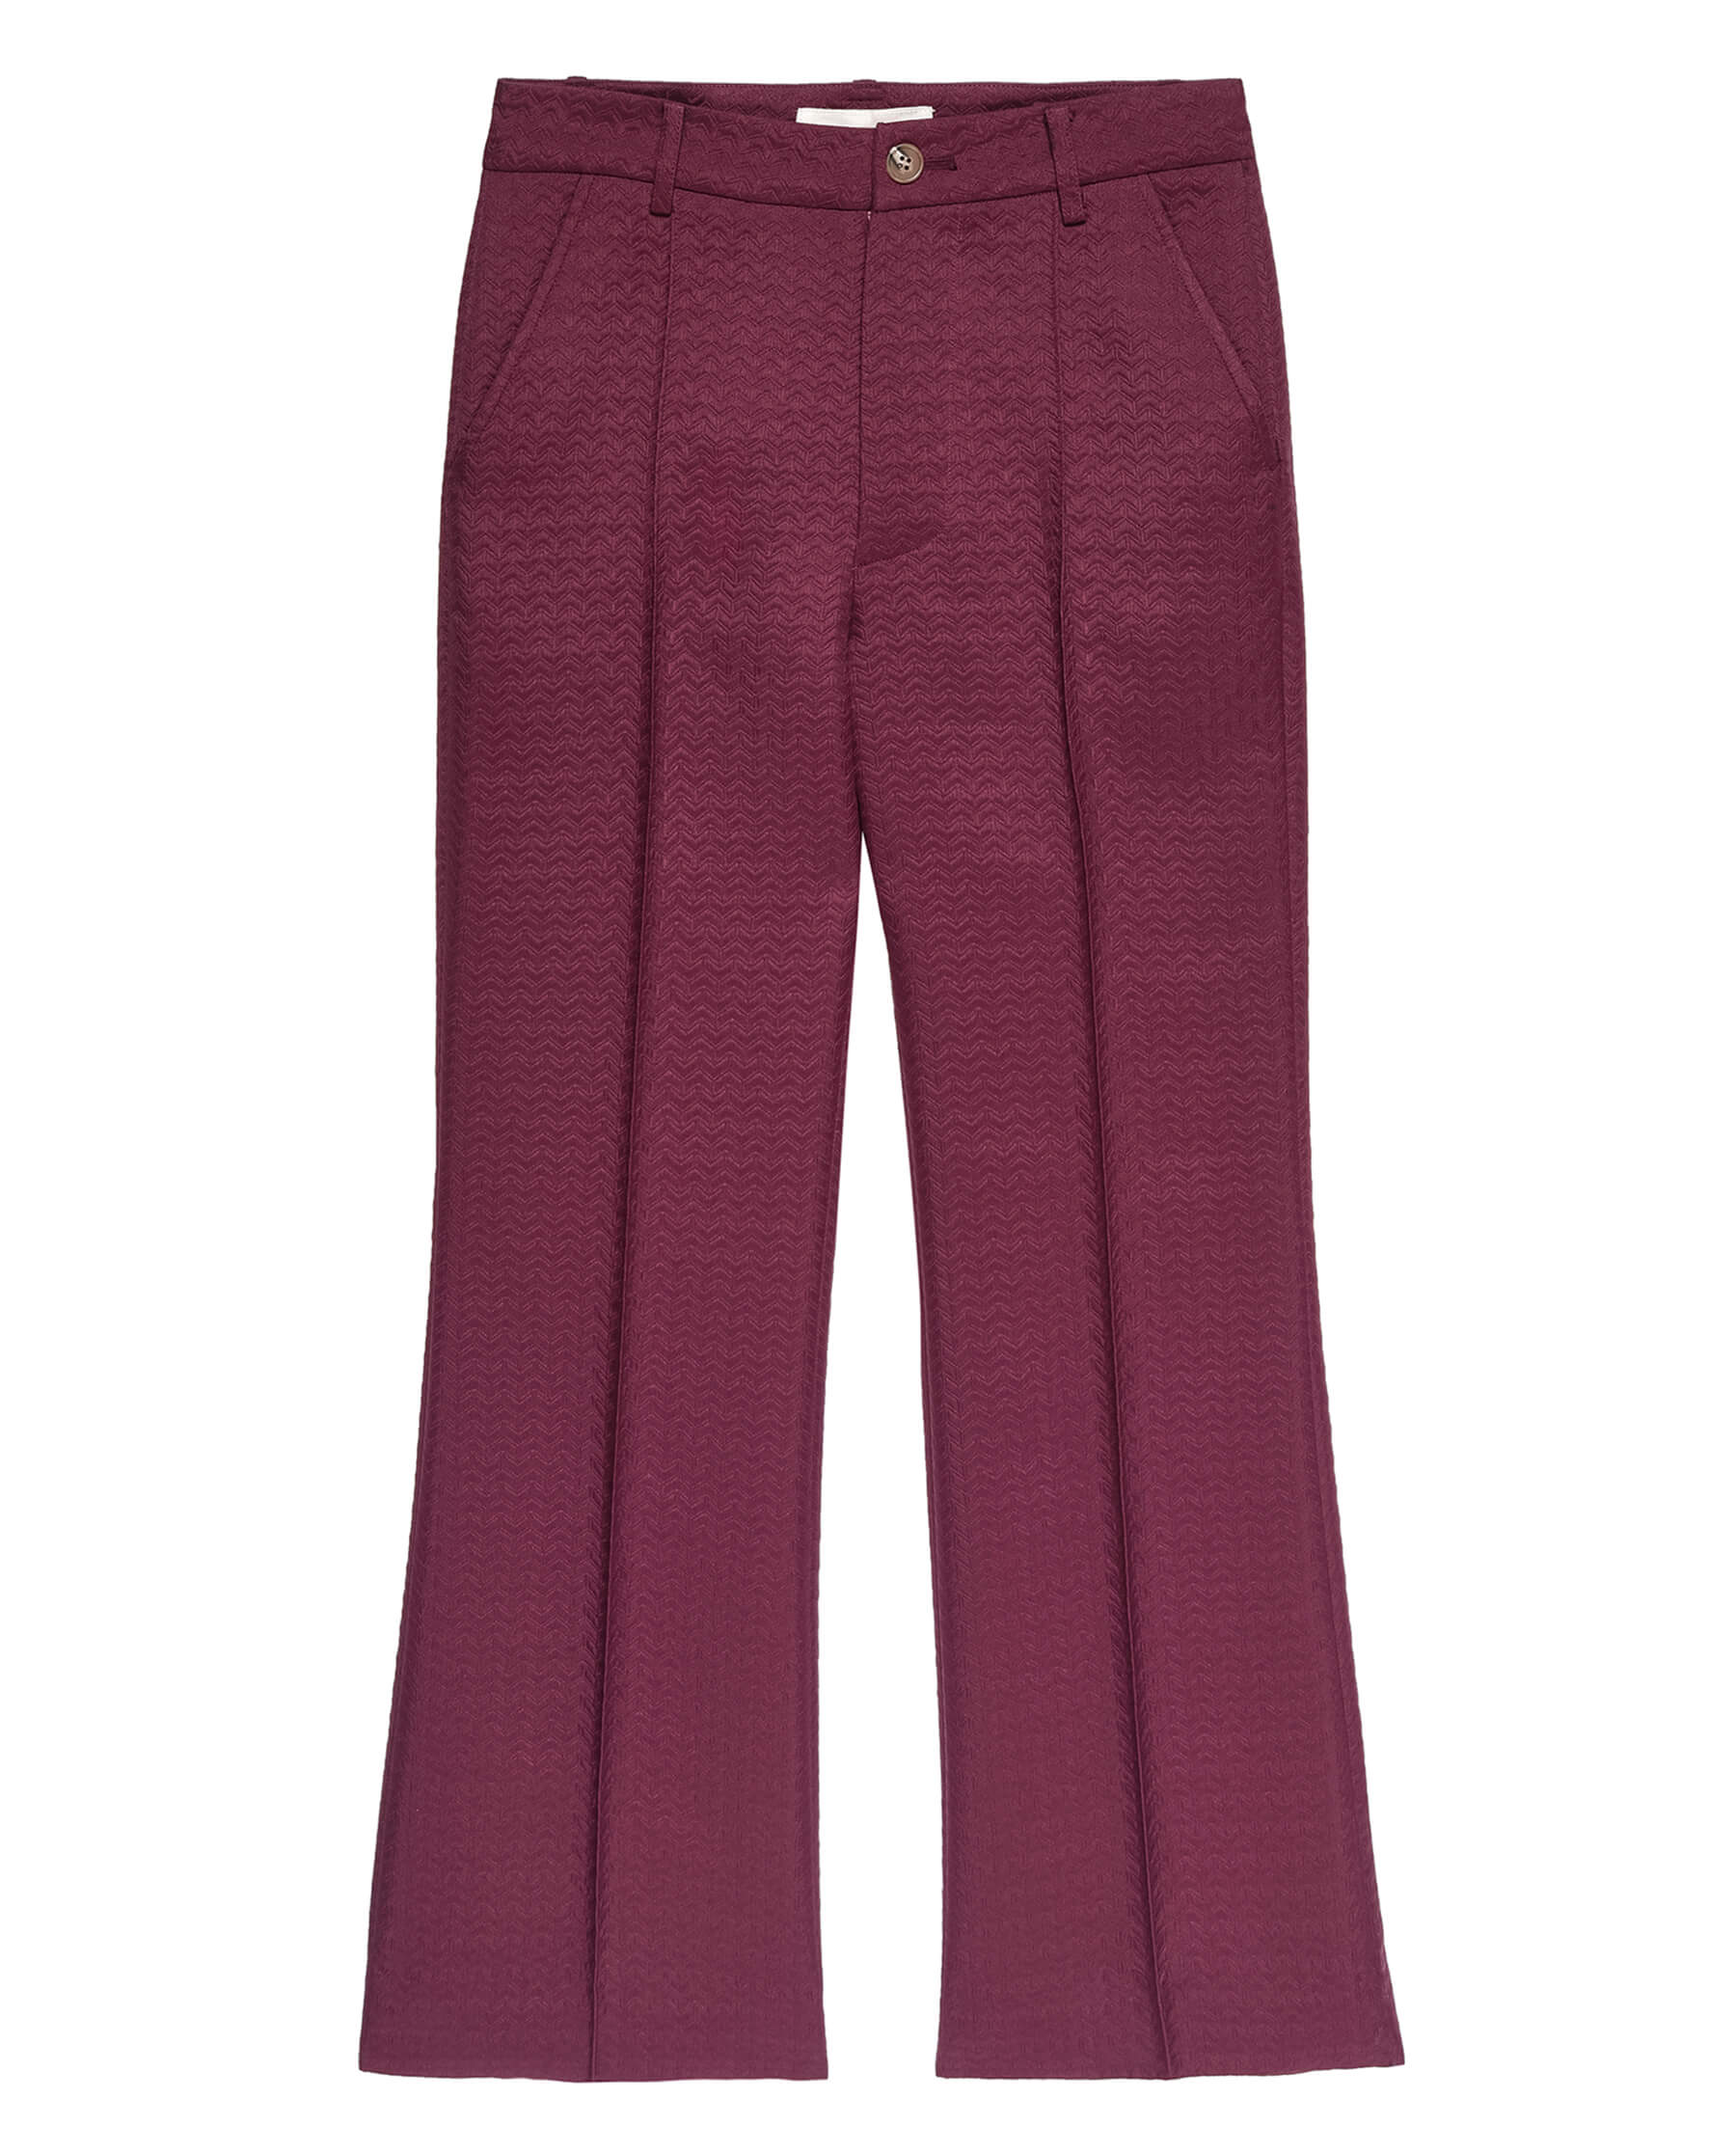 The Geo Jacquard Prim Trouser. -- Mulled Wine TWILL BOTTOM THE GREAT. HOL 23 D1 SALE